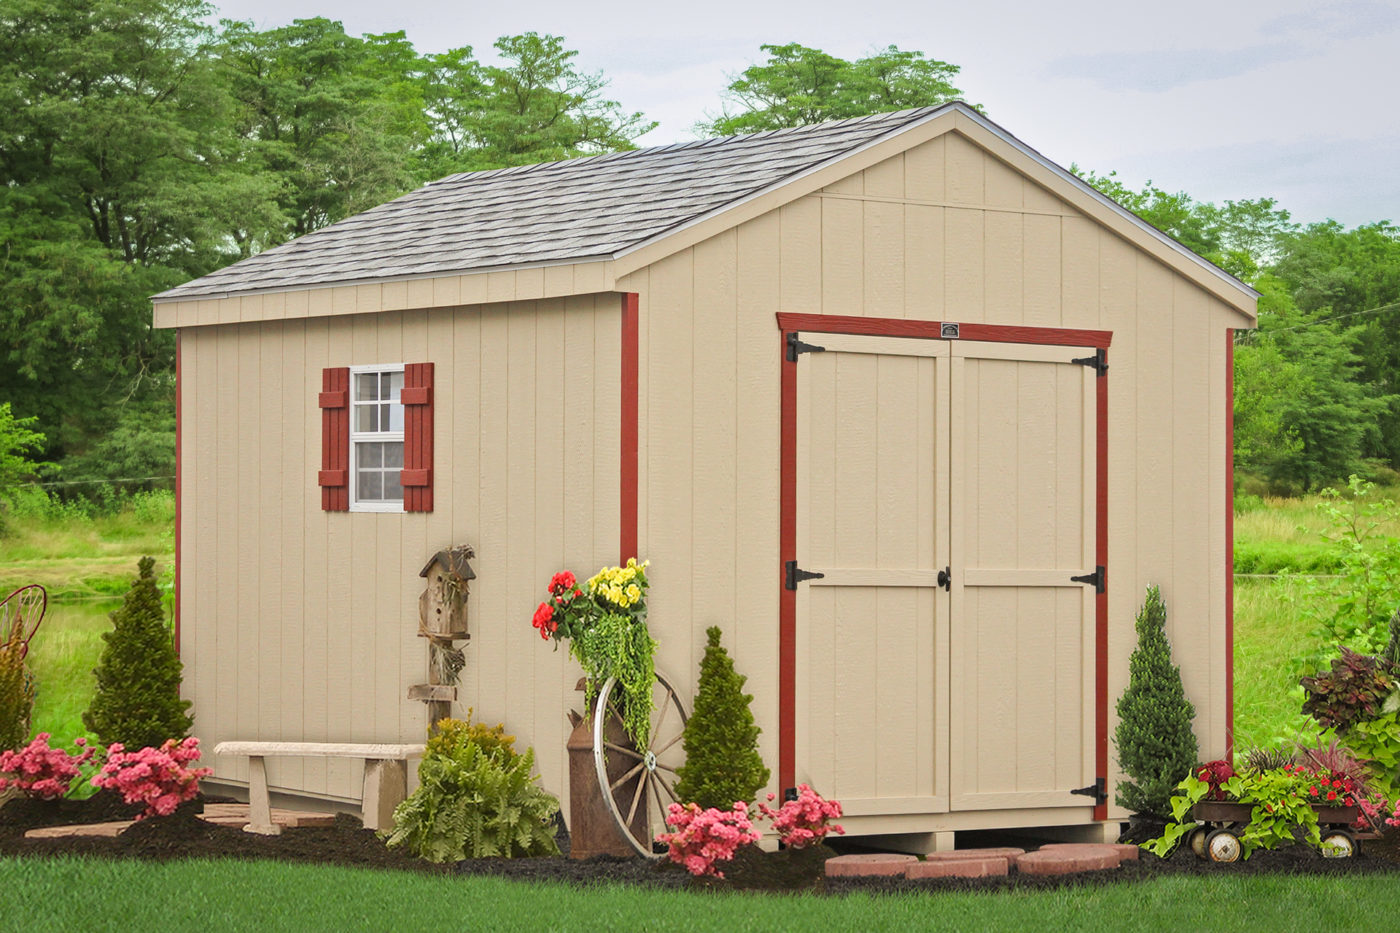 A workshop shed from Sheds Unlimited